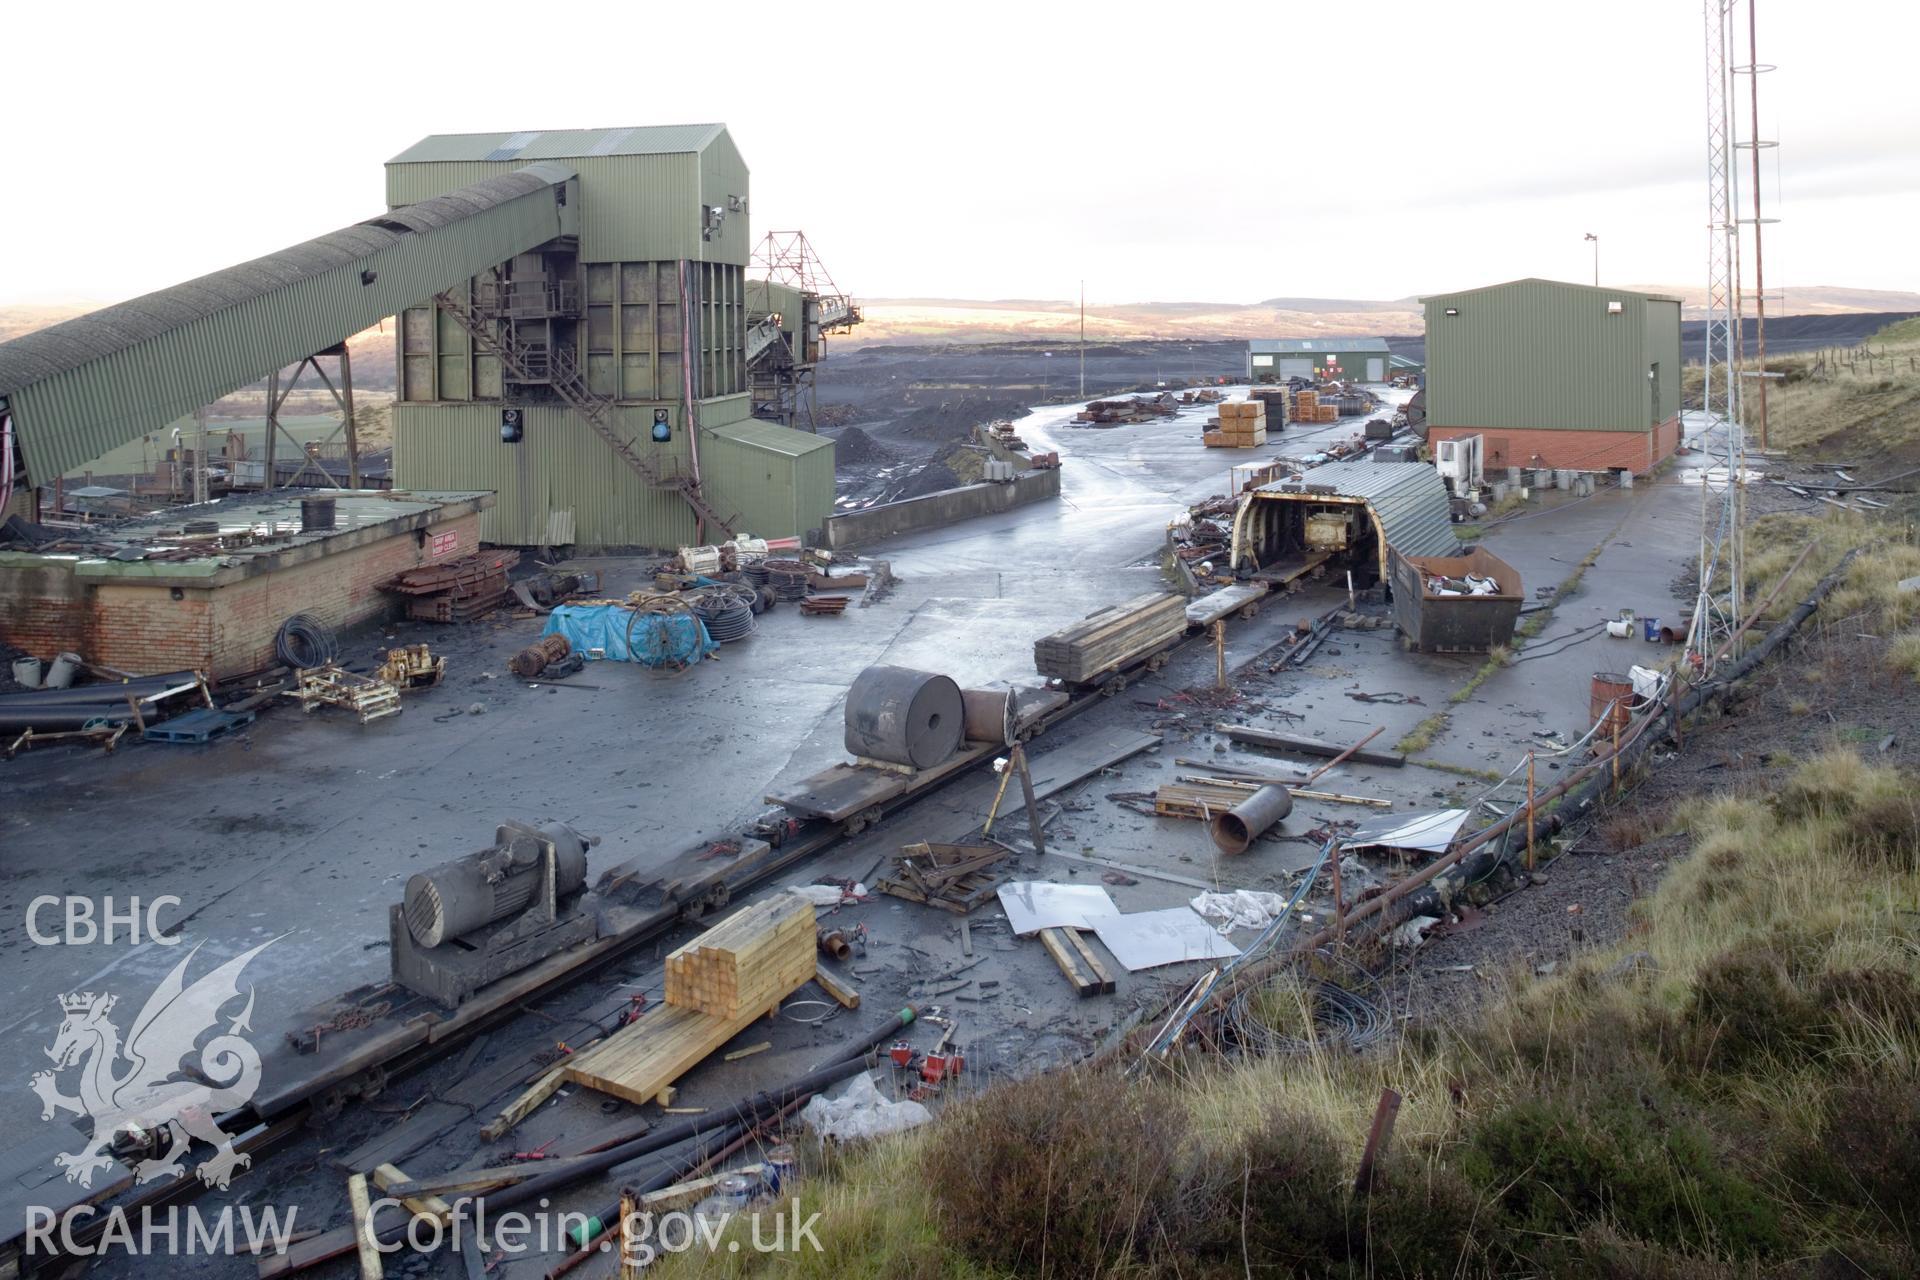 Conveyor transfer house on left, materials marshalling yard in foreground, drift winding house on right.